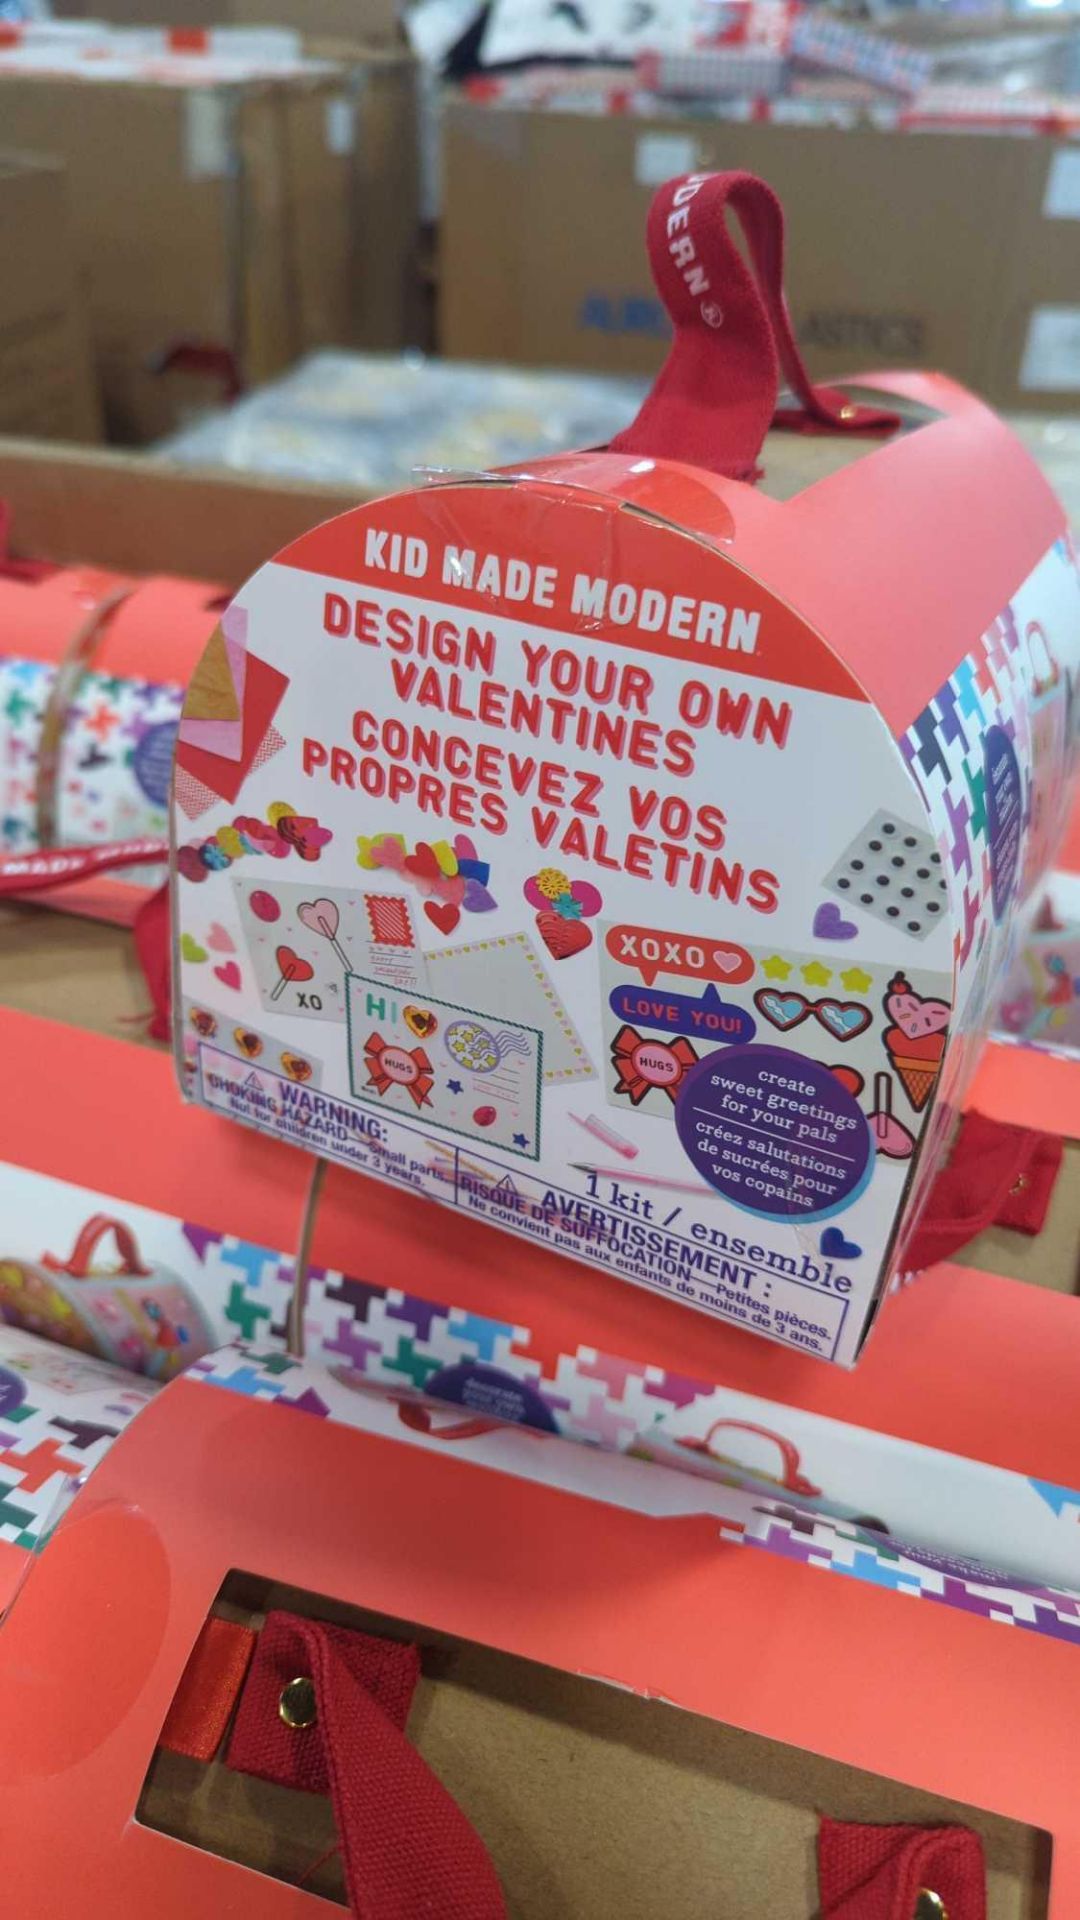 GL kid made modern design your own Valentine's approximately 189 pieces - Image 2 of 5